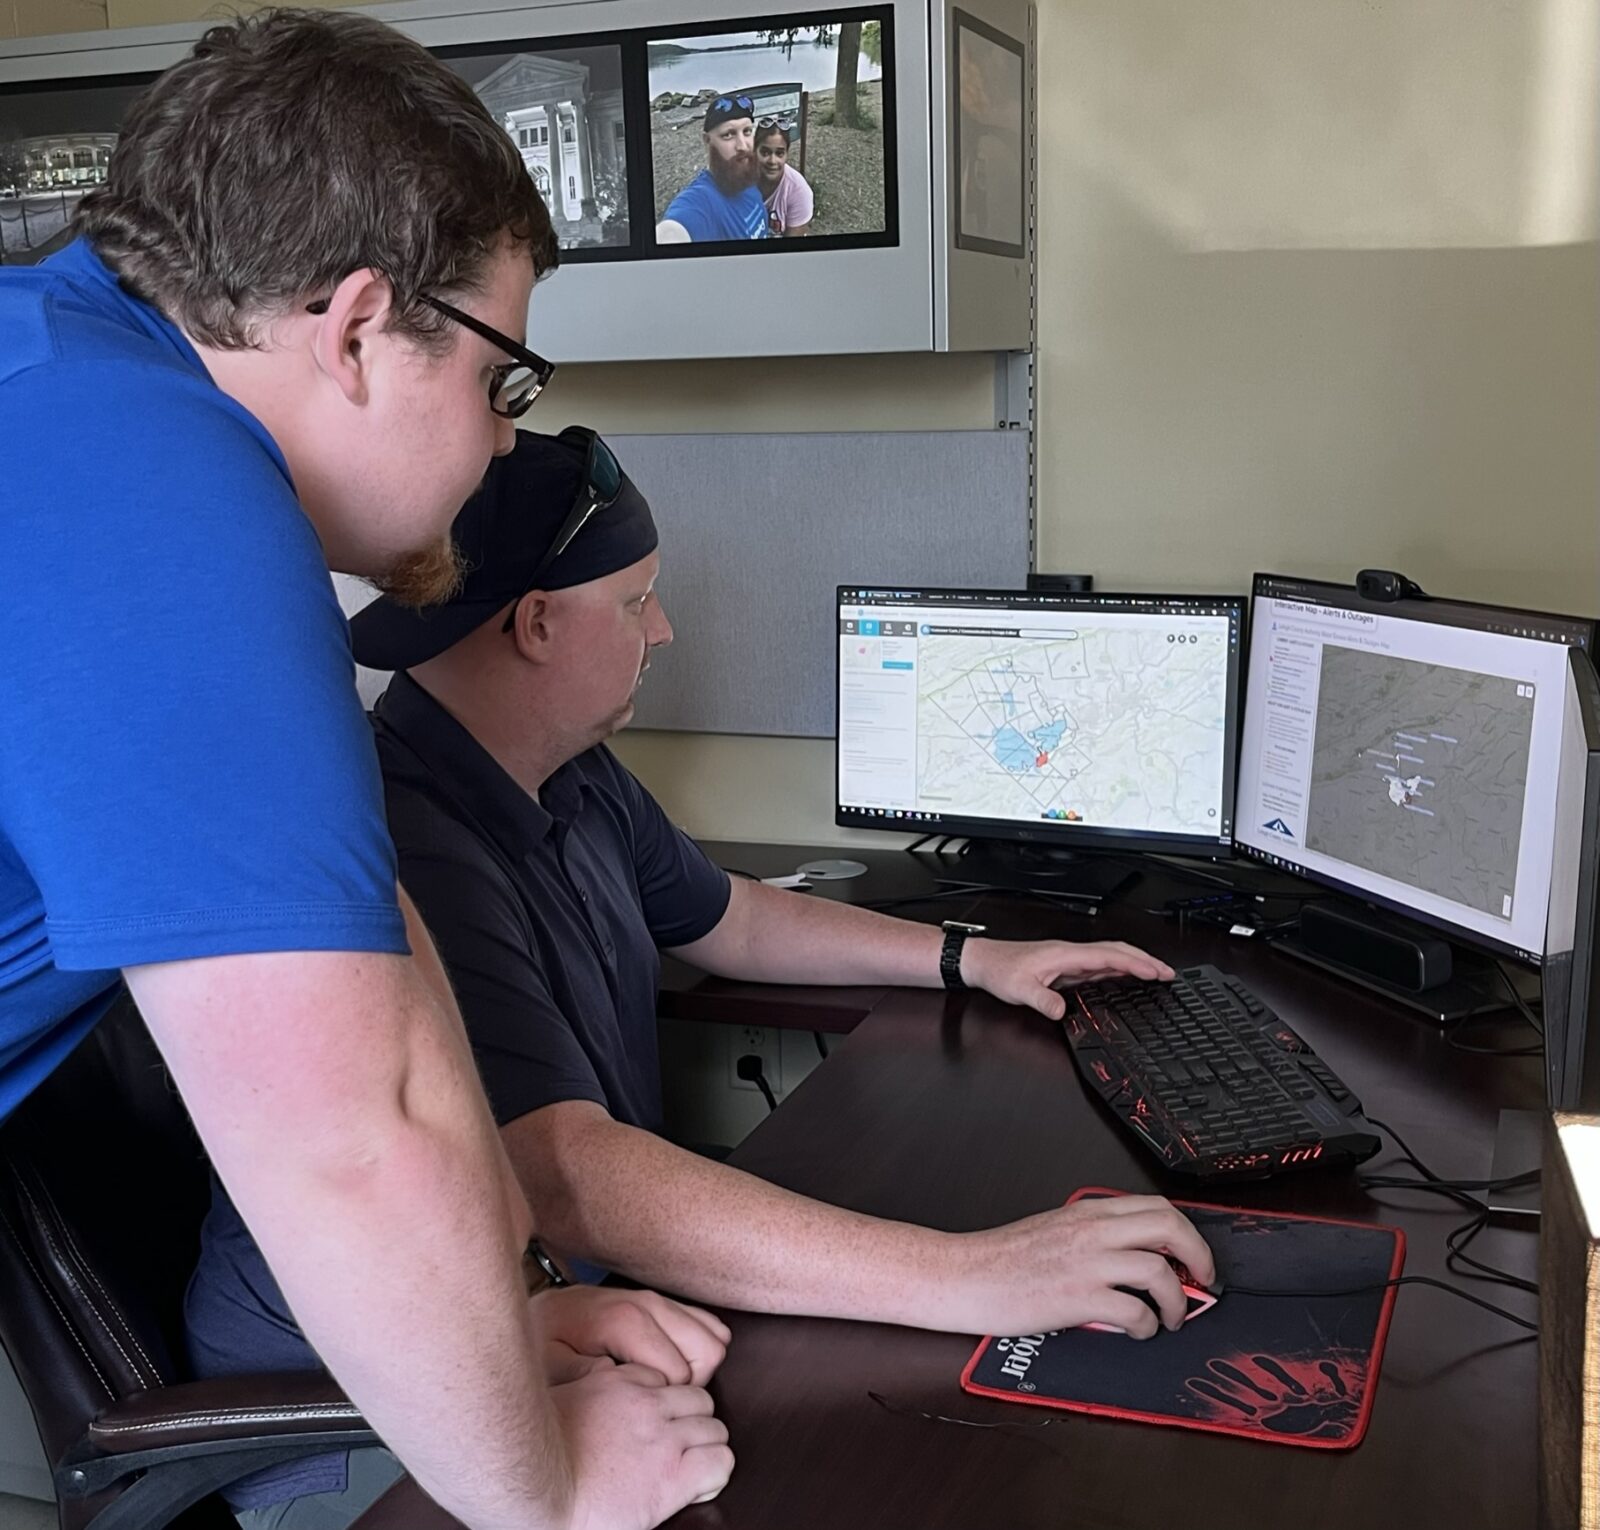 A picture of LCA employees Dan Stevens, asset management technology manager, and James Luma, GIS specialist, as they look at a computerized map of LCA assets, to illustrate a story on how LCA uses GIS to track assets.